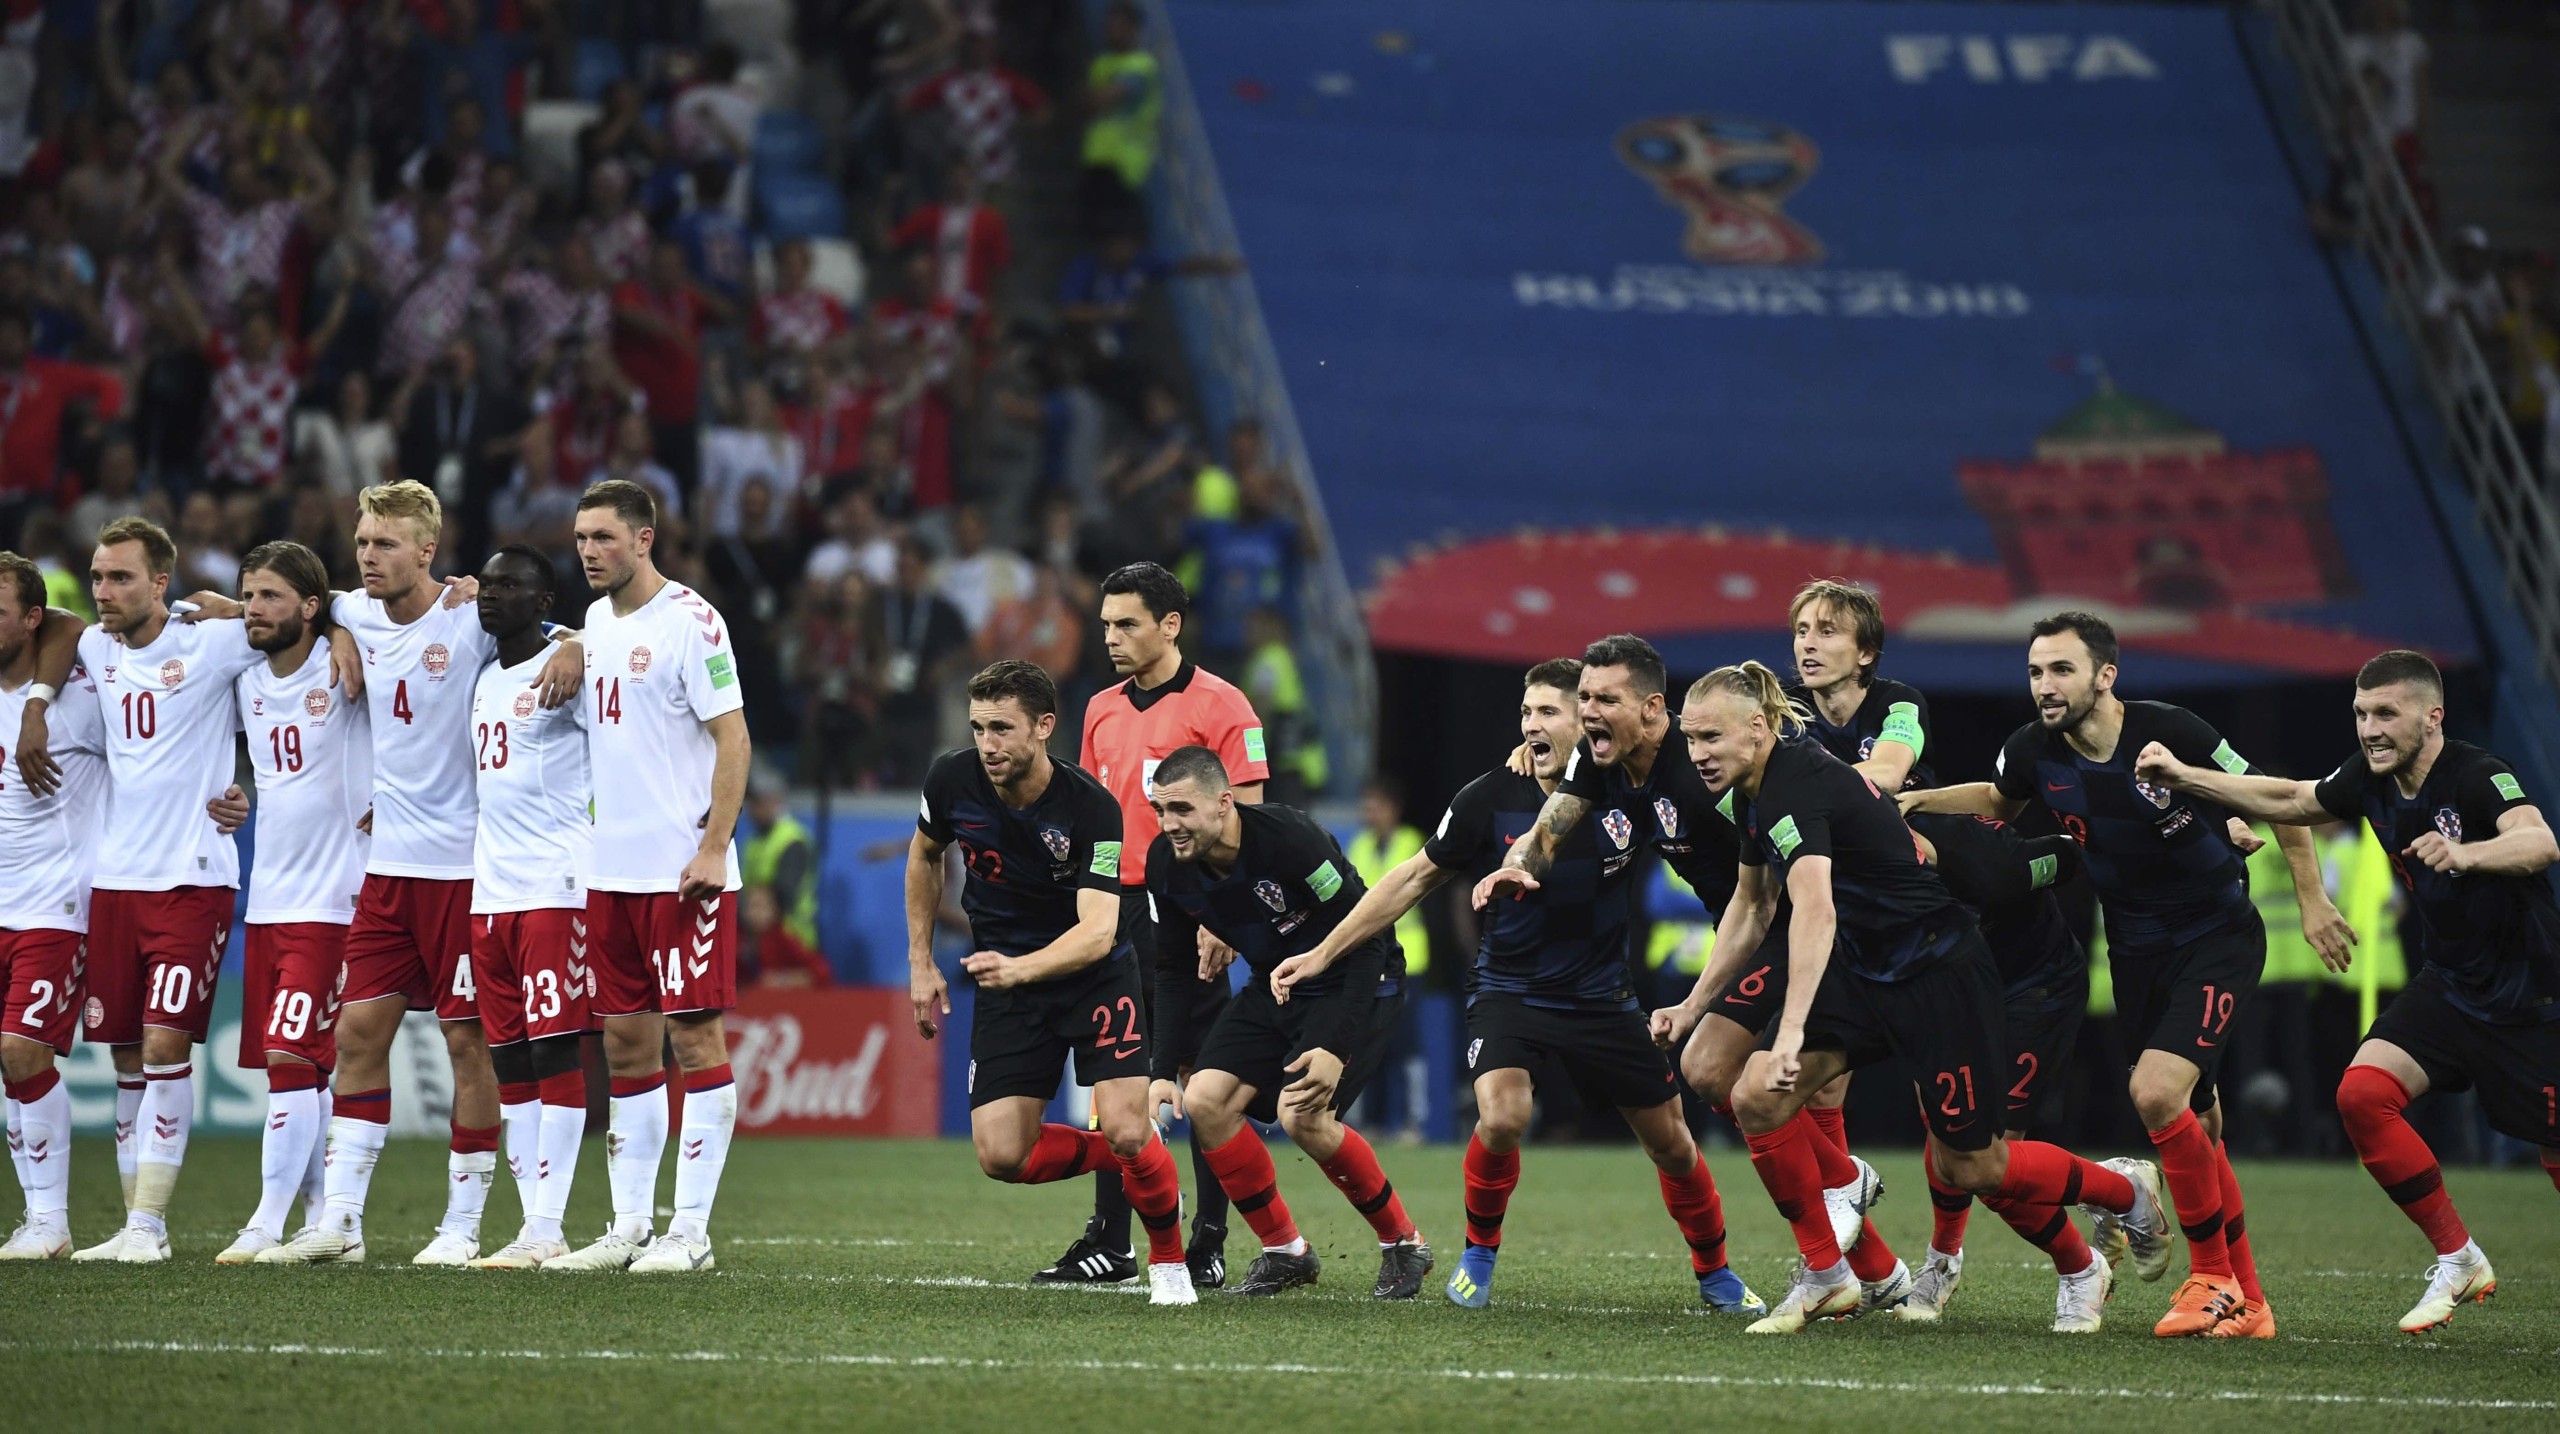 Players of Croatia celebrate after defeating Denmark in the Round of 16 match during the FIFA World Cup 2018 in Nizhny Novgorod, Russia, 1 July 2018. Croatia has come back after conceding in the opening minute to earn a World Cup quarter-final berth, edging Denmark 3-2 in a penalty shootout after the two sides drew 1-1 in the round of 16 match. It could have wrapped up the result five minutes from the end of extra-time, but Luka Modric had his penalty saved by Kasper Schmeichel. However, the Croatia captain returned to bravely take one of the post-match kicks as goalkeeper Danijel Subasic save three of Denmark's efforts to set up a quarter-final meeting with Russia.  (Imaginechina via AP Images)